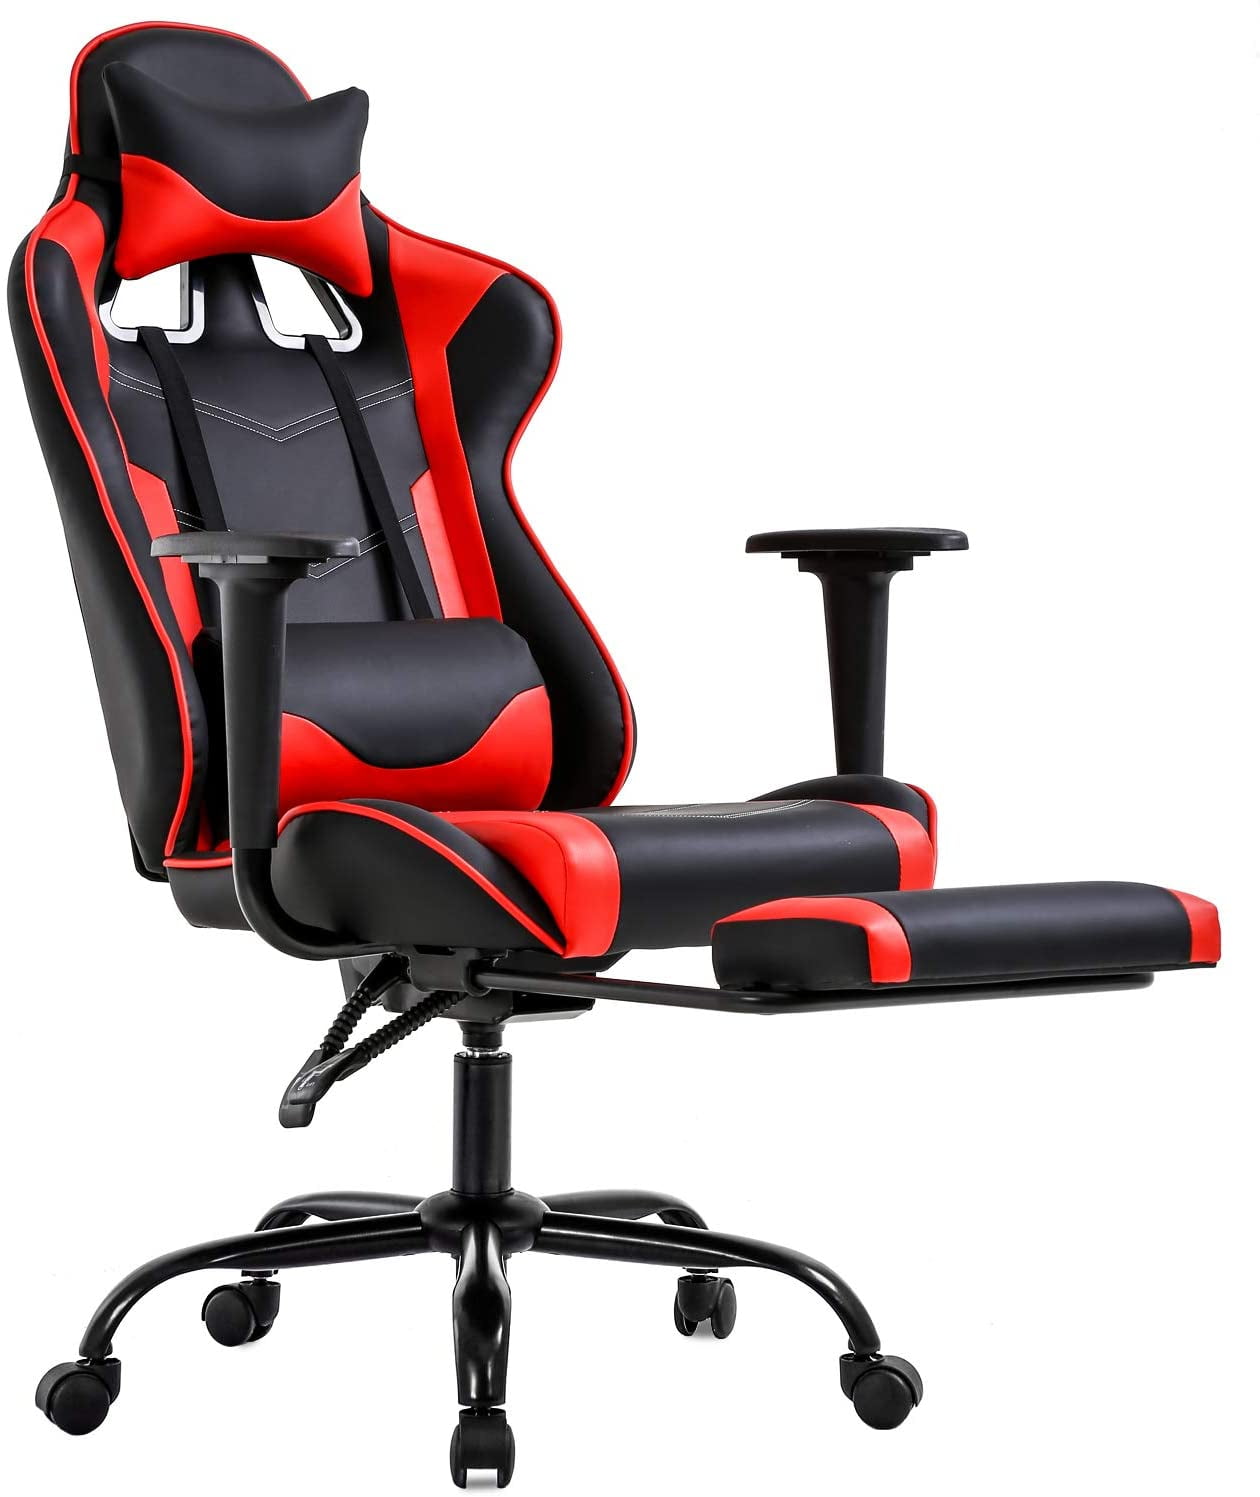 Video Gaming Chair Racing Office PU Leather High Back Ergonomic Adjustable Swivel Executive Computer Desk Task for Adults Large Size with Footrest,Headrest and Lumbar Support Black+red 